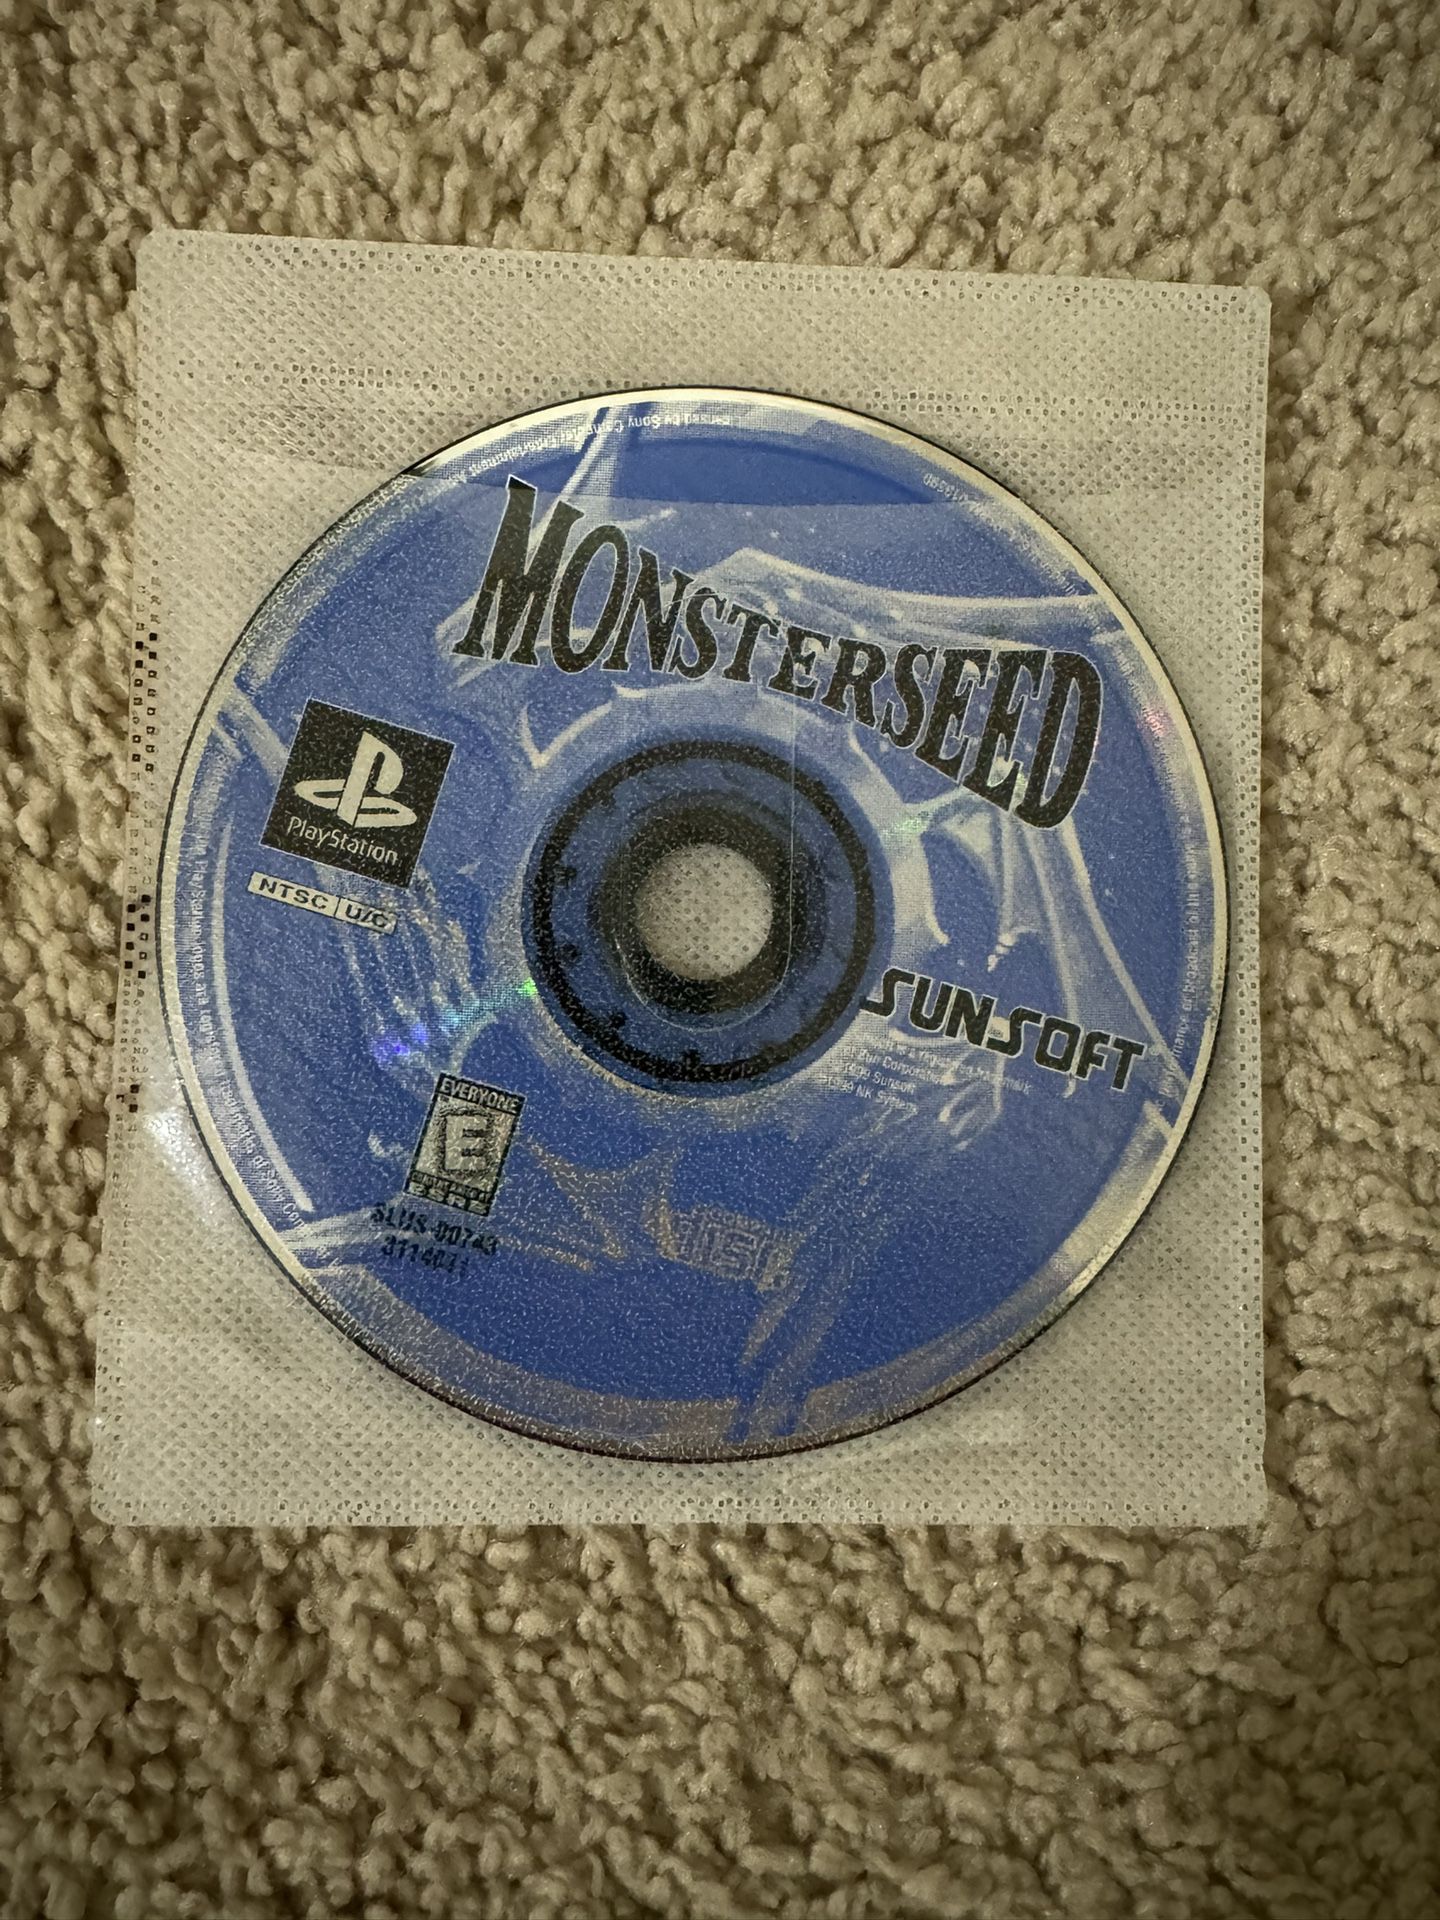 Monsterseed PS1 Game - Excellent Condition